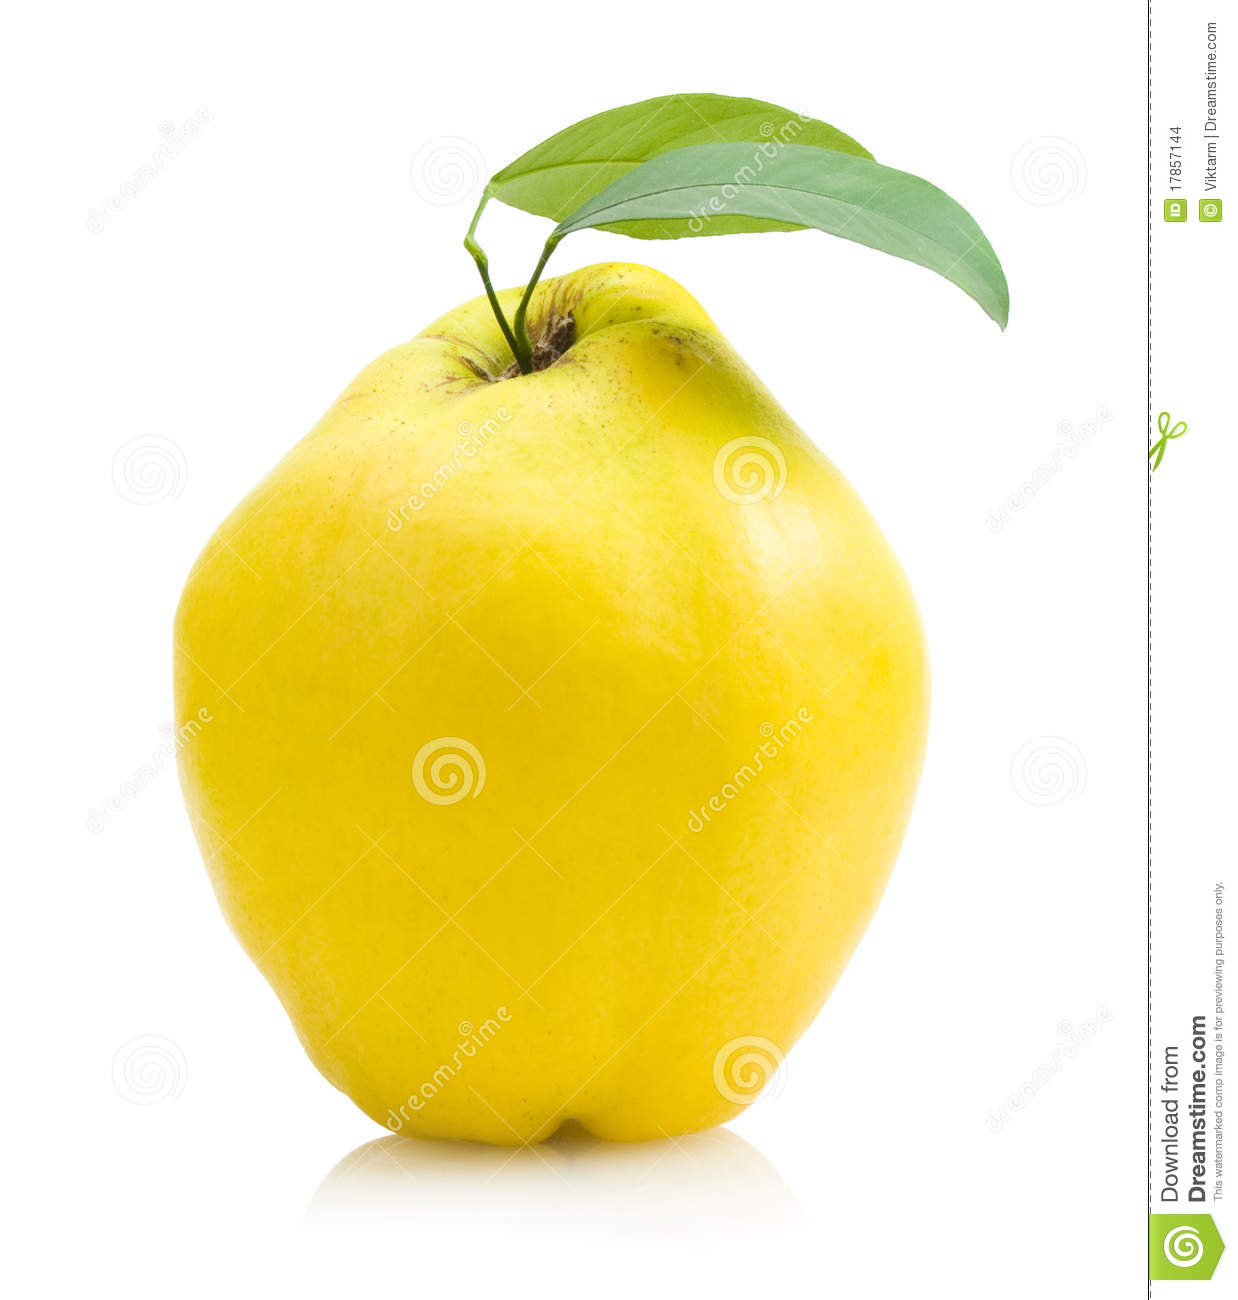 Quince Stock Images   Image  17857144